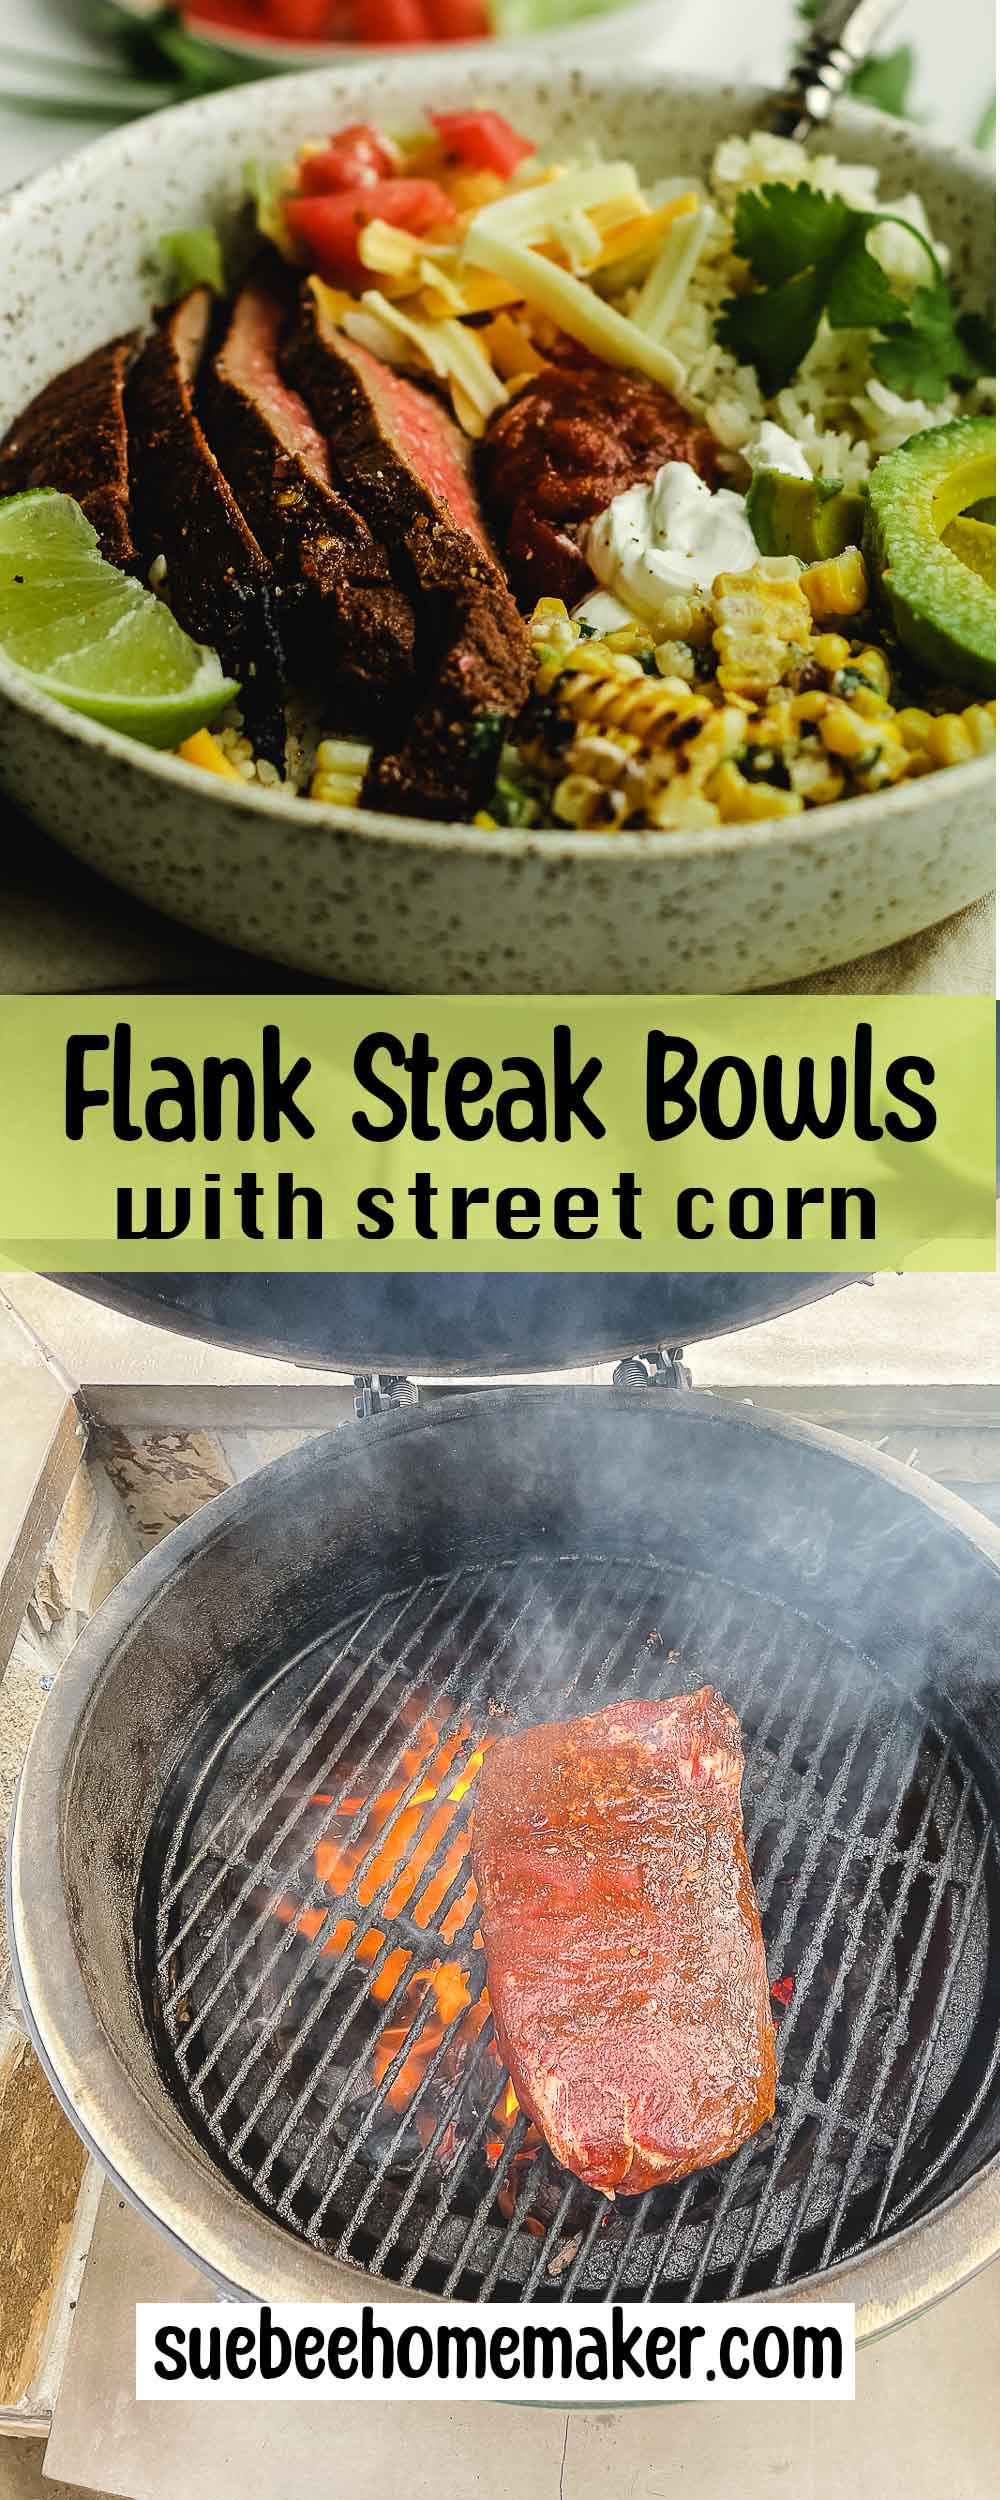 A collage of photos of Flank Steak Bowls with street corn.